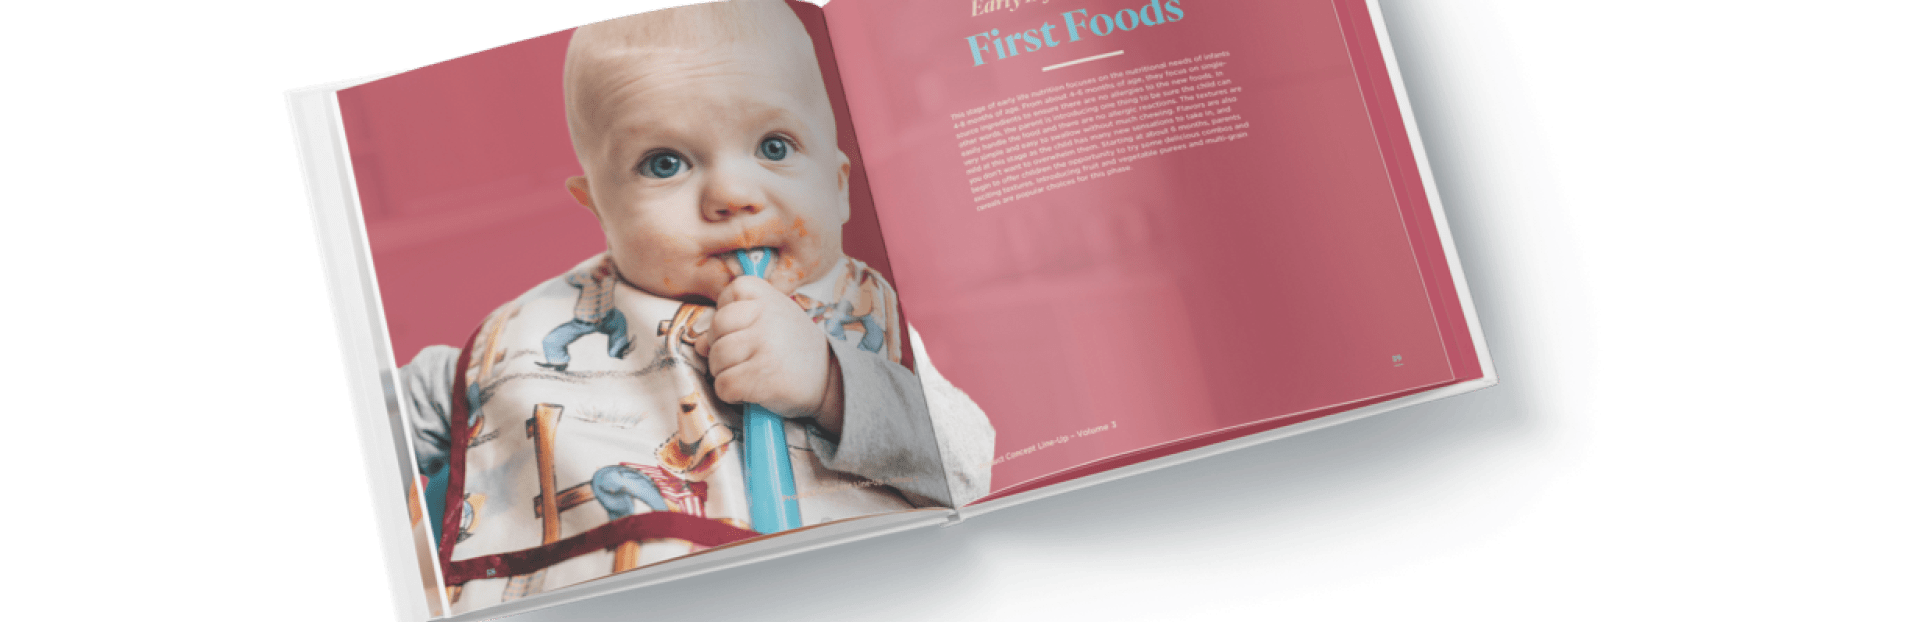 Early Life Nutrition – First Foods | Glanbia Nutritionals